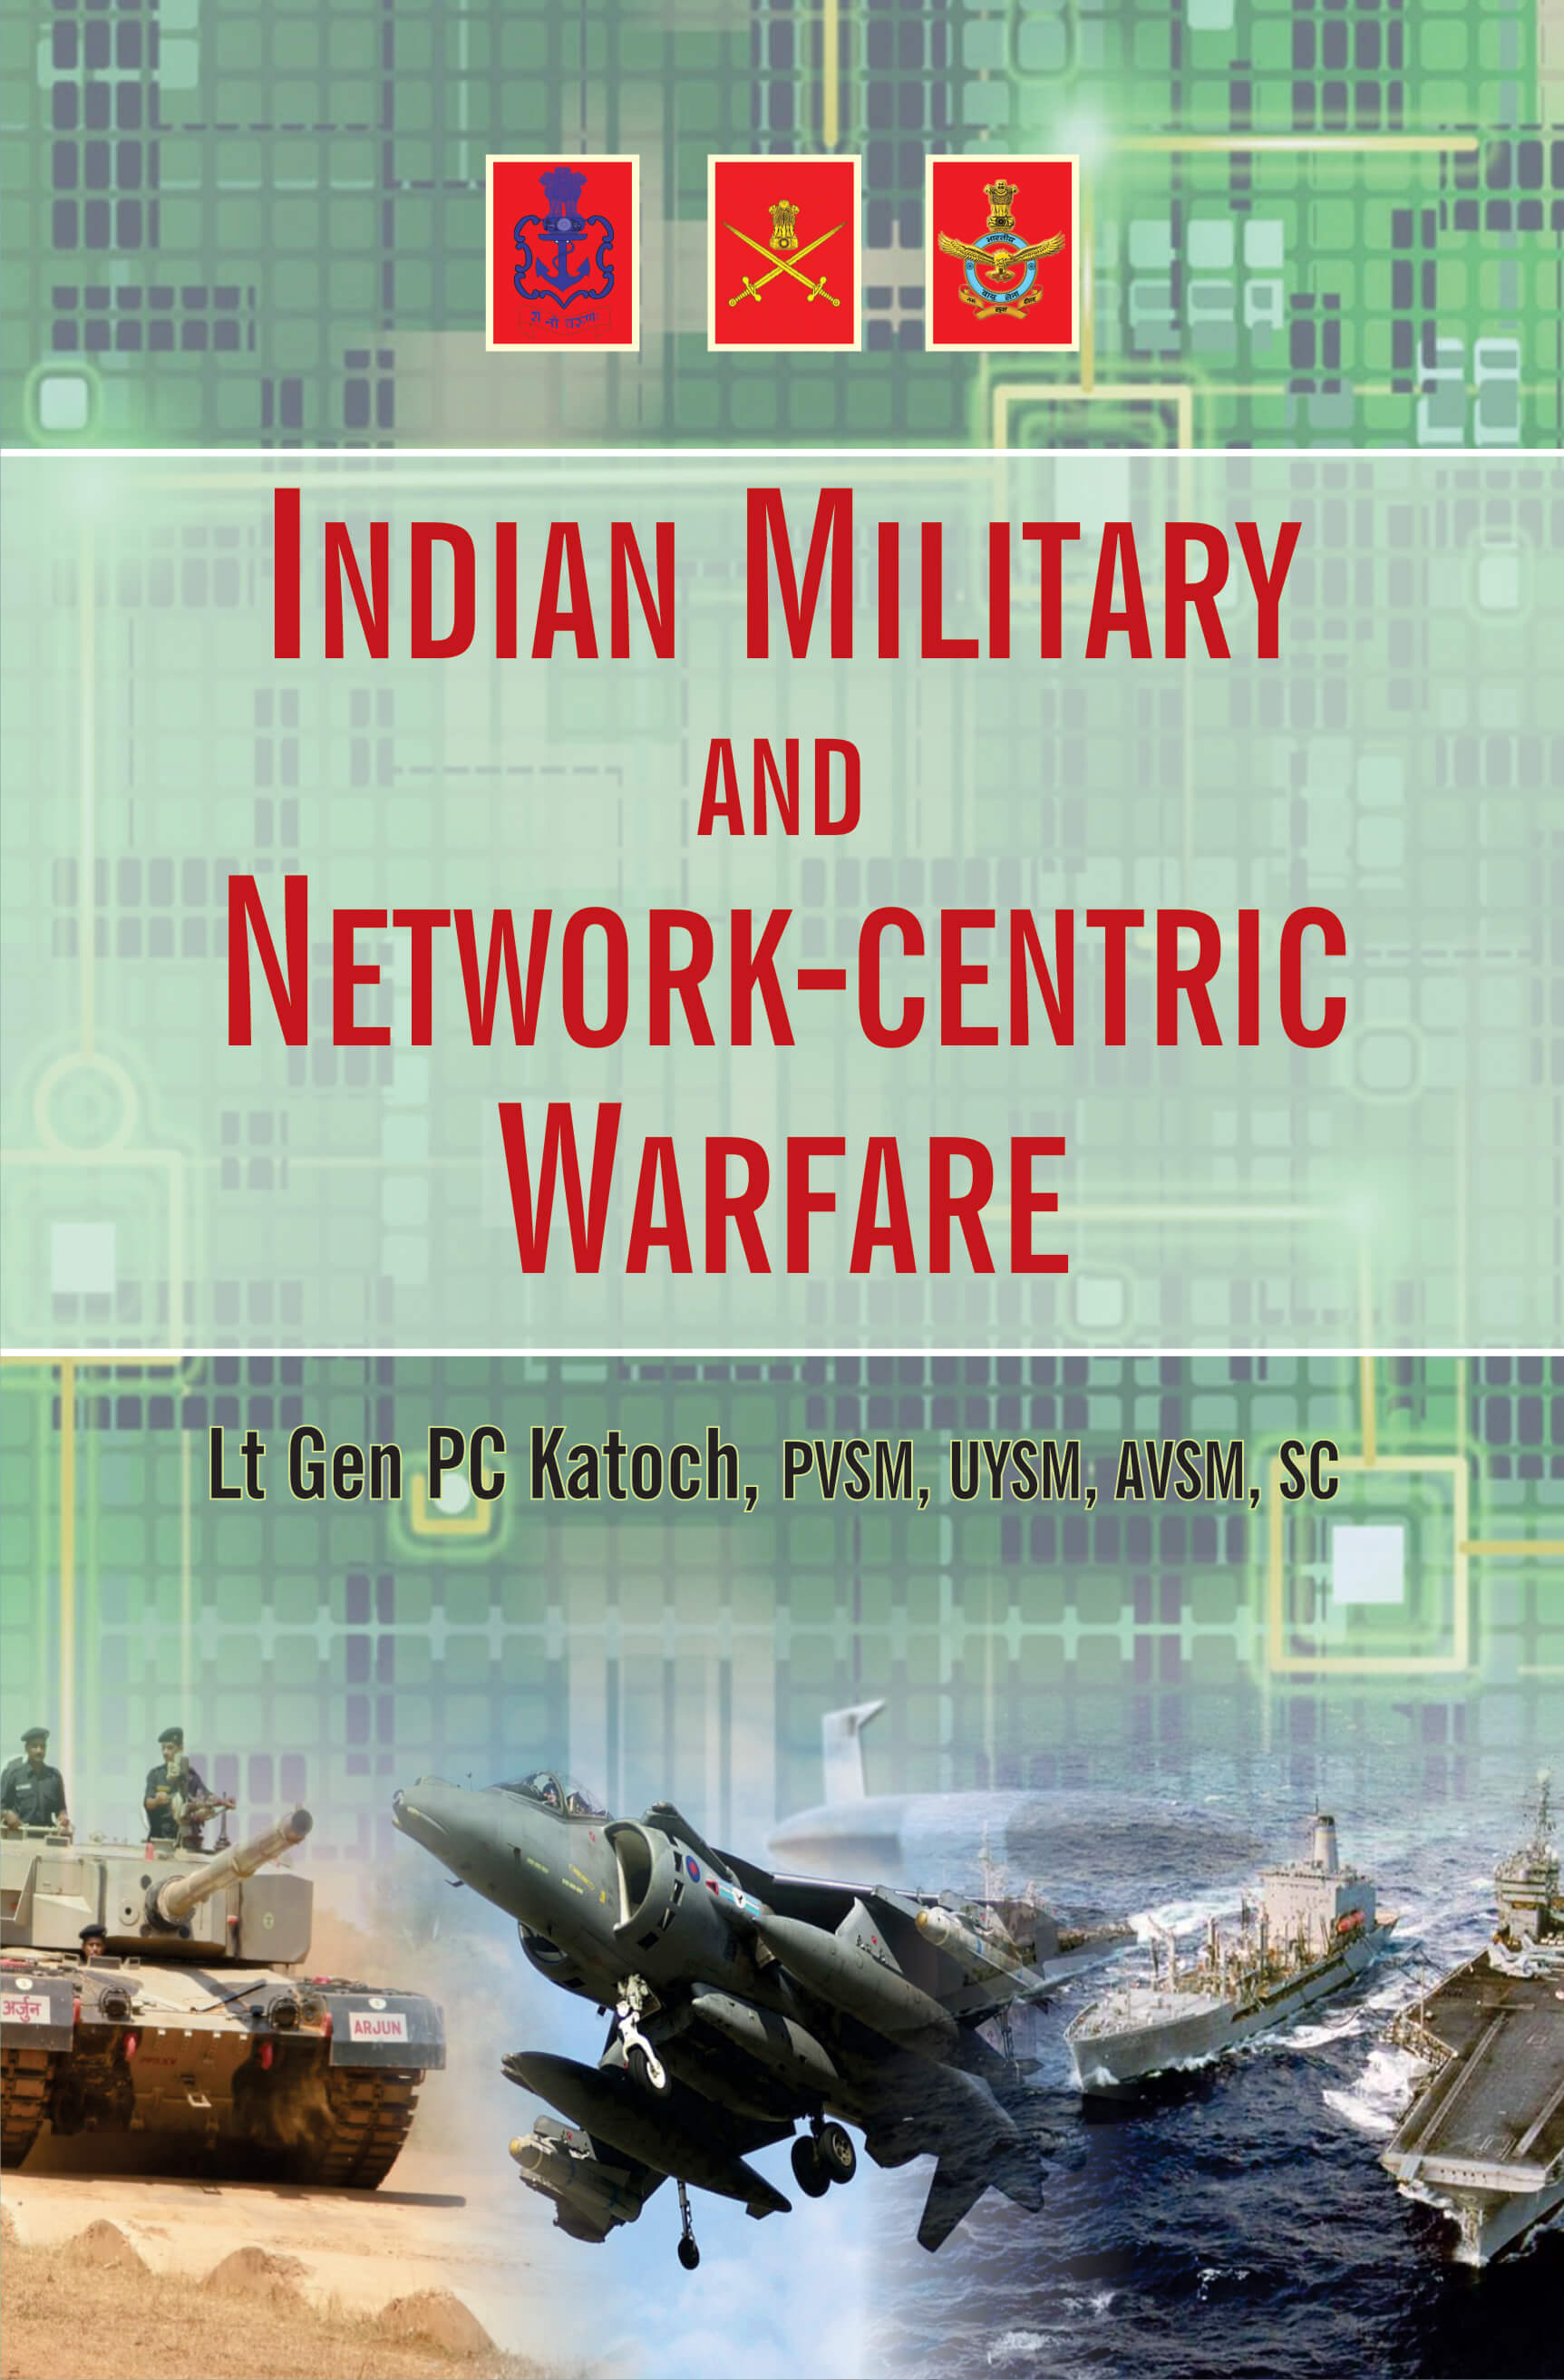 Indian Military And Network-Centric Warfare